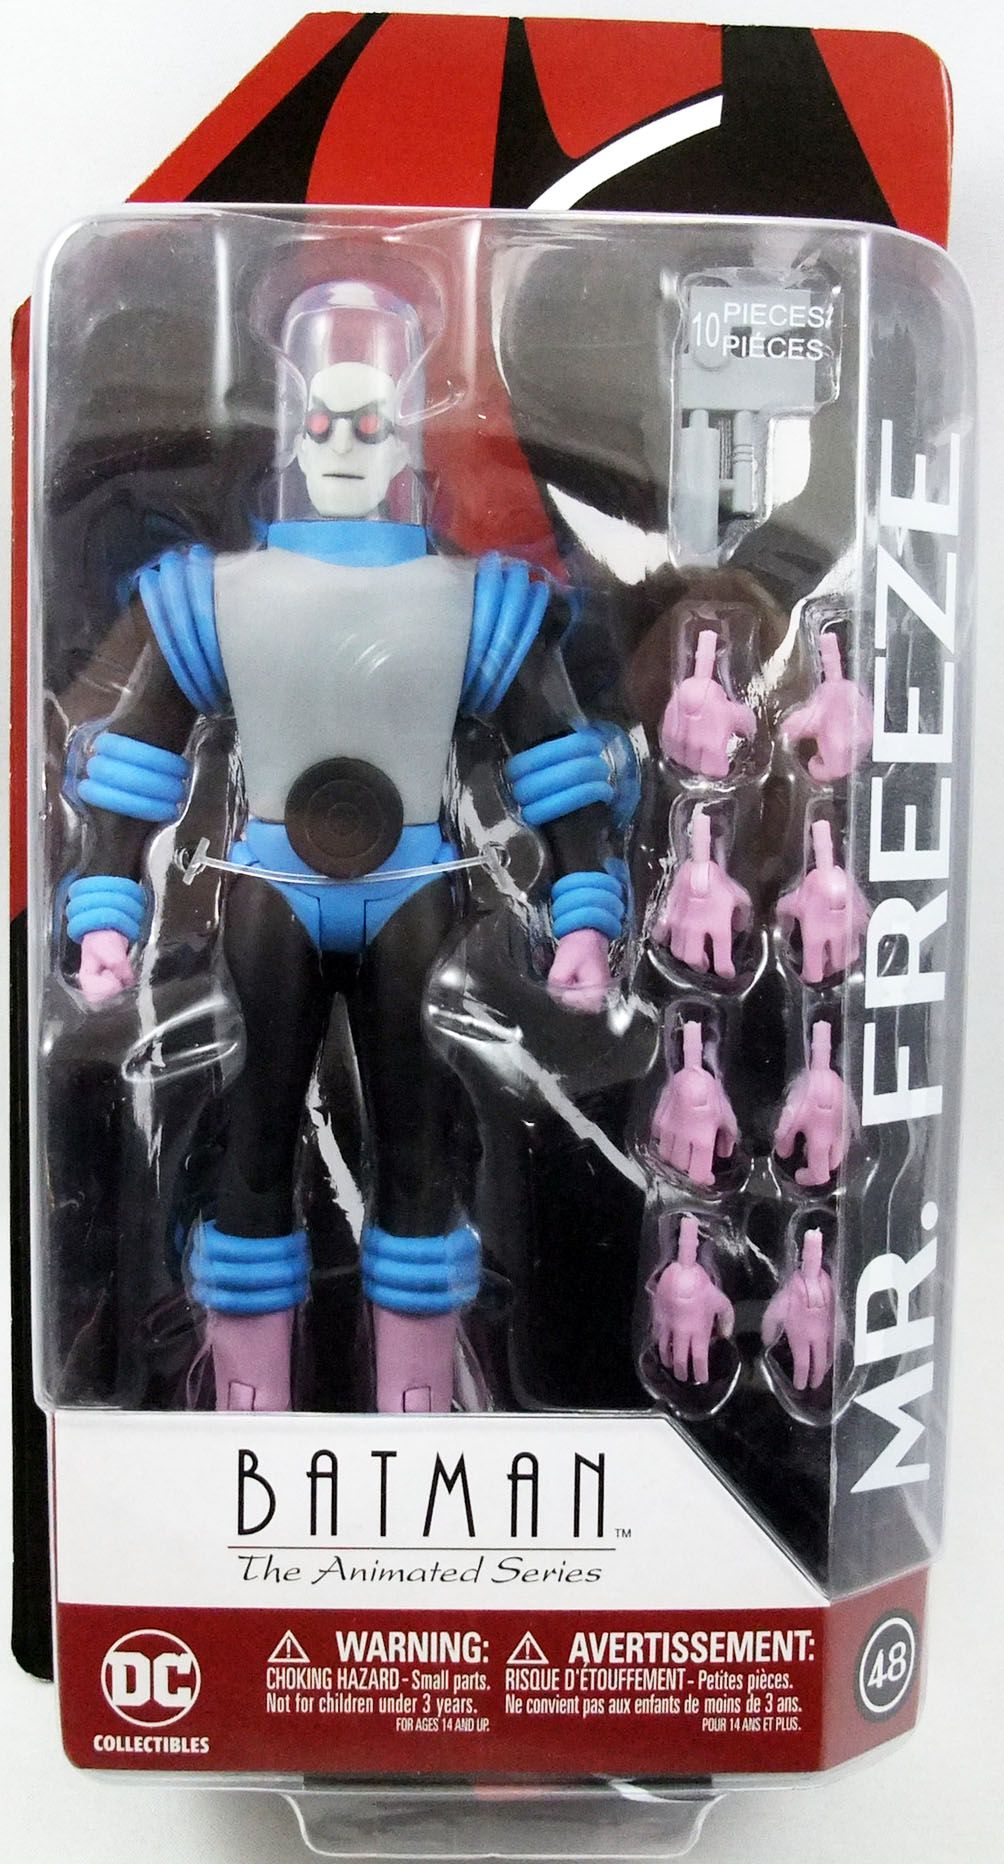 DC Collectibles Batman Animated Series MR FREEZE action Figure old 7" mn7 